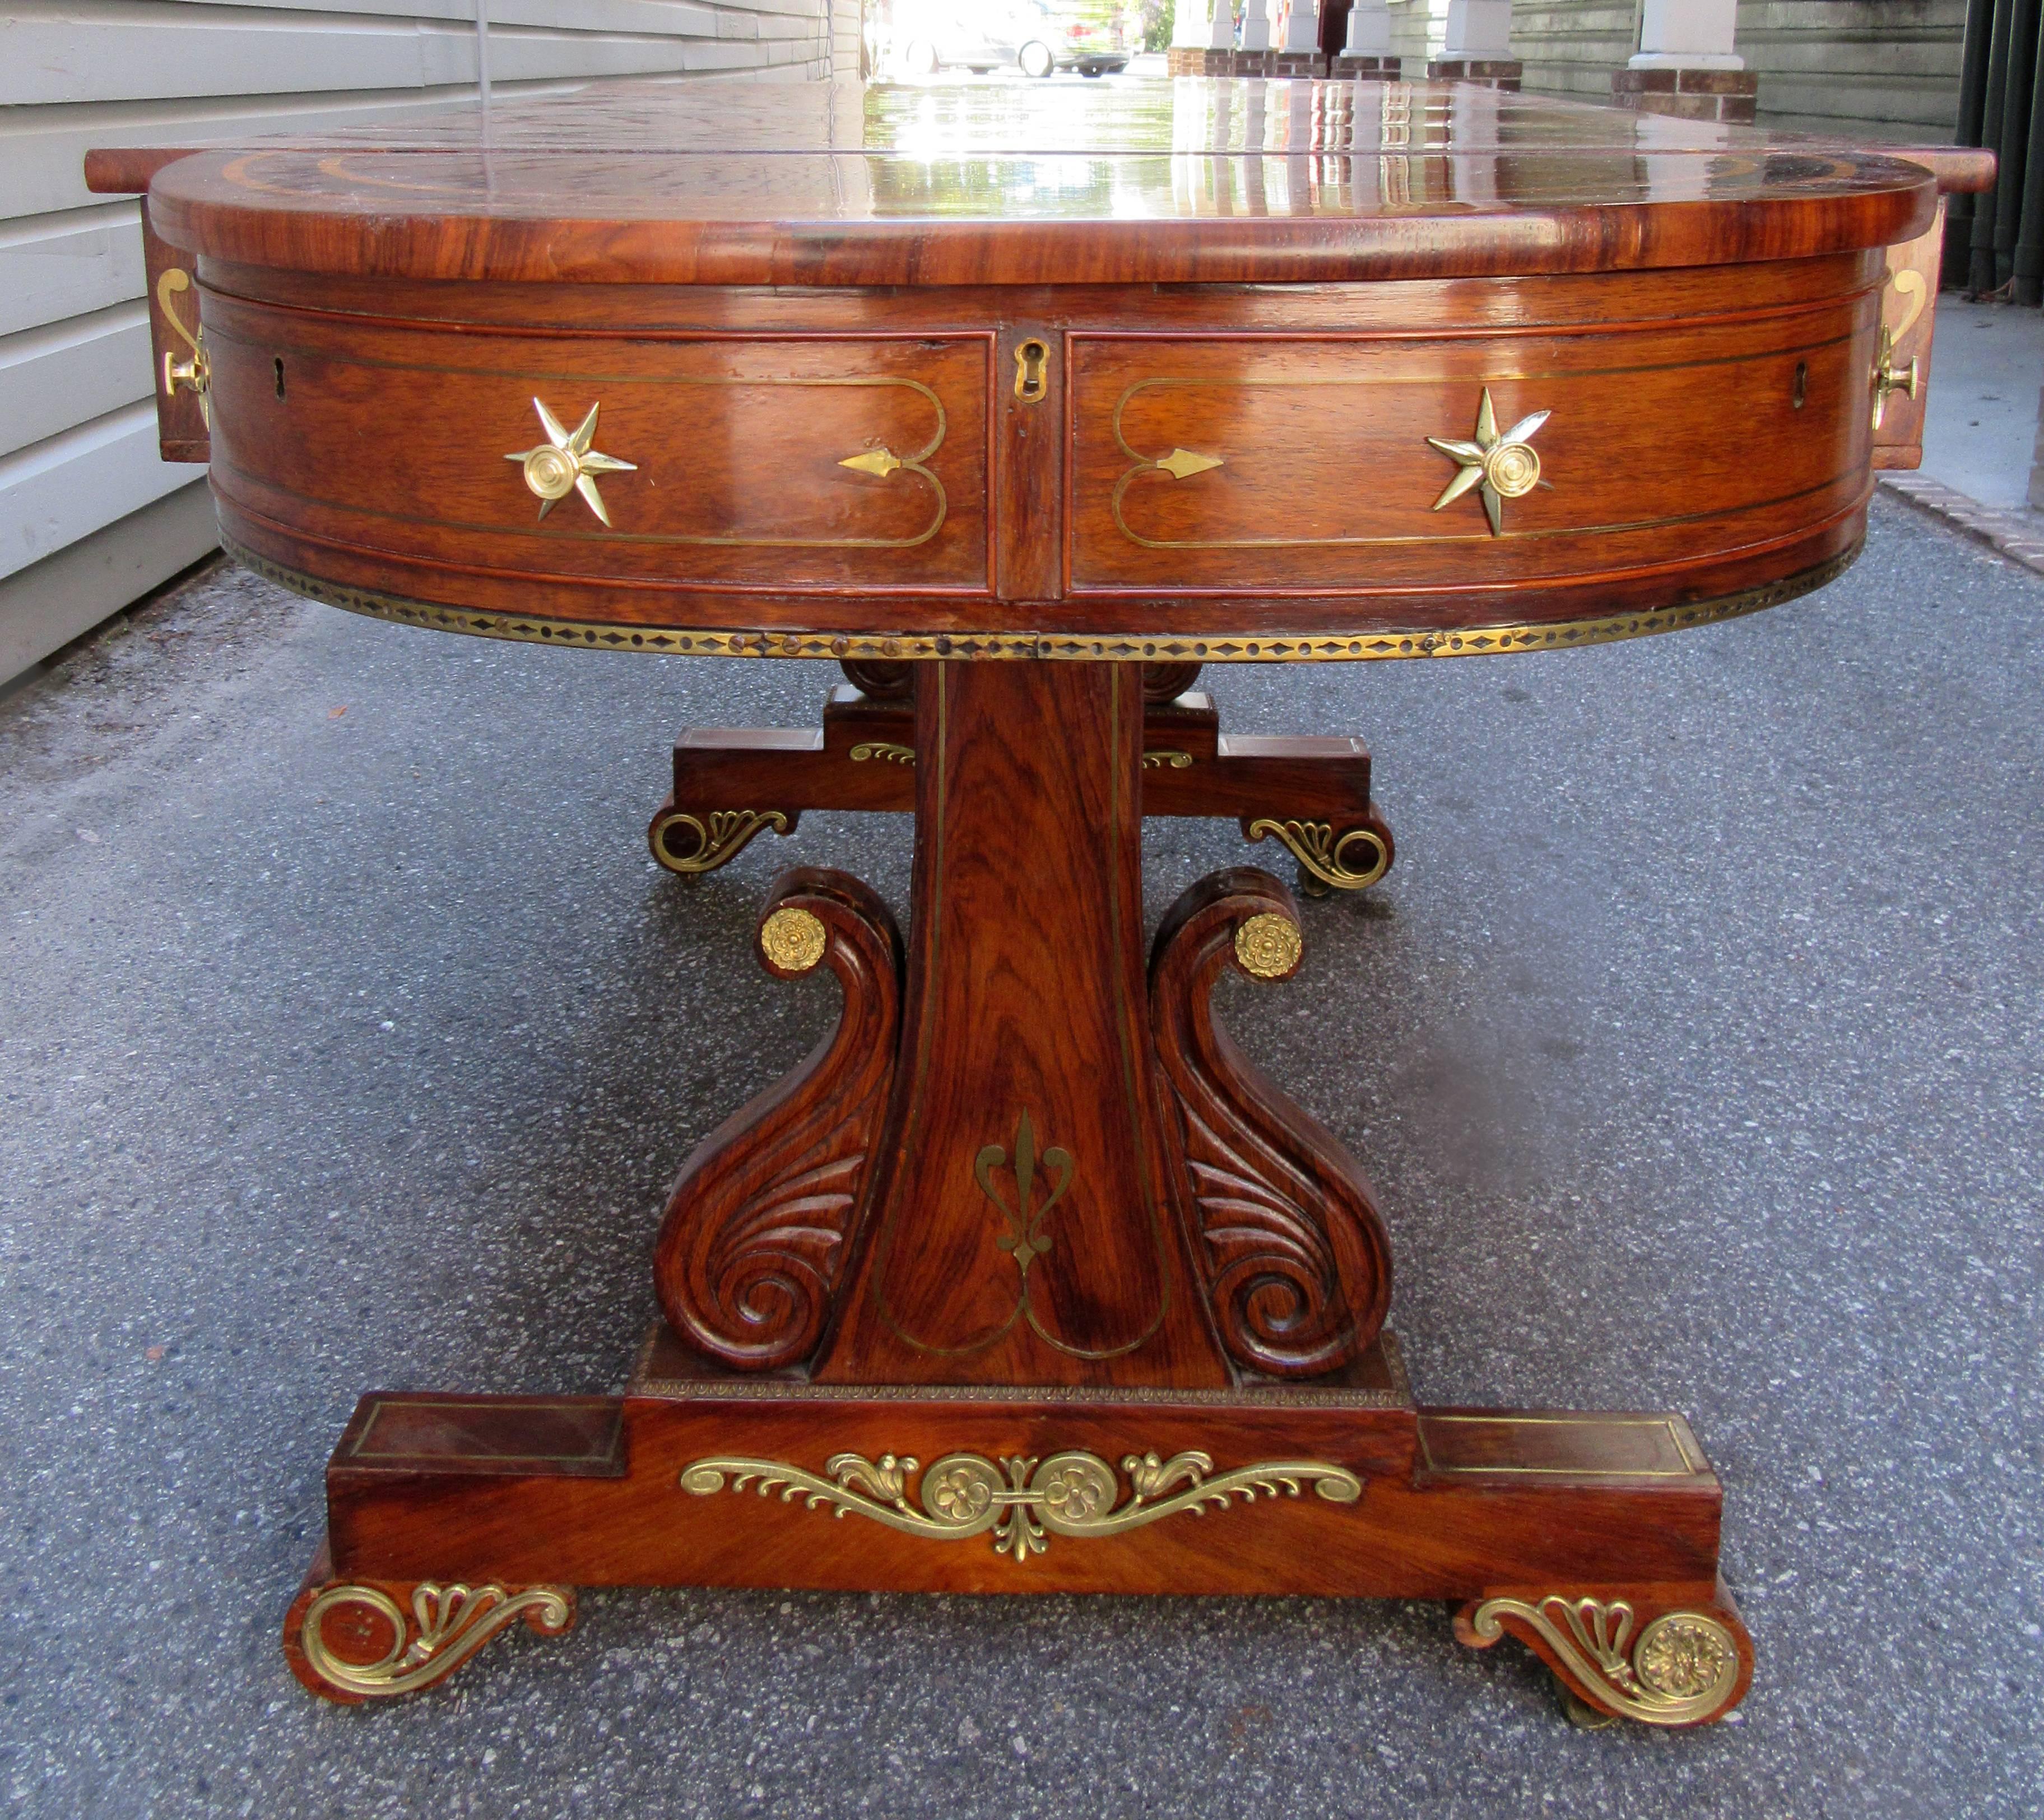 Inlay 19th Century English Regency Rosewood Sofa Table Attributed to Gillows